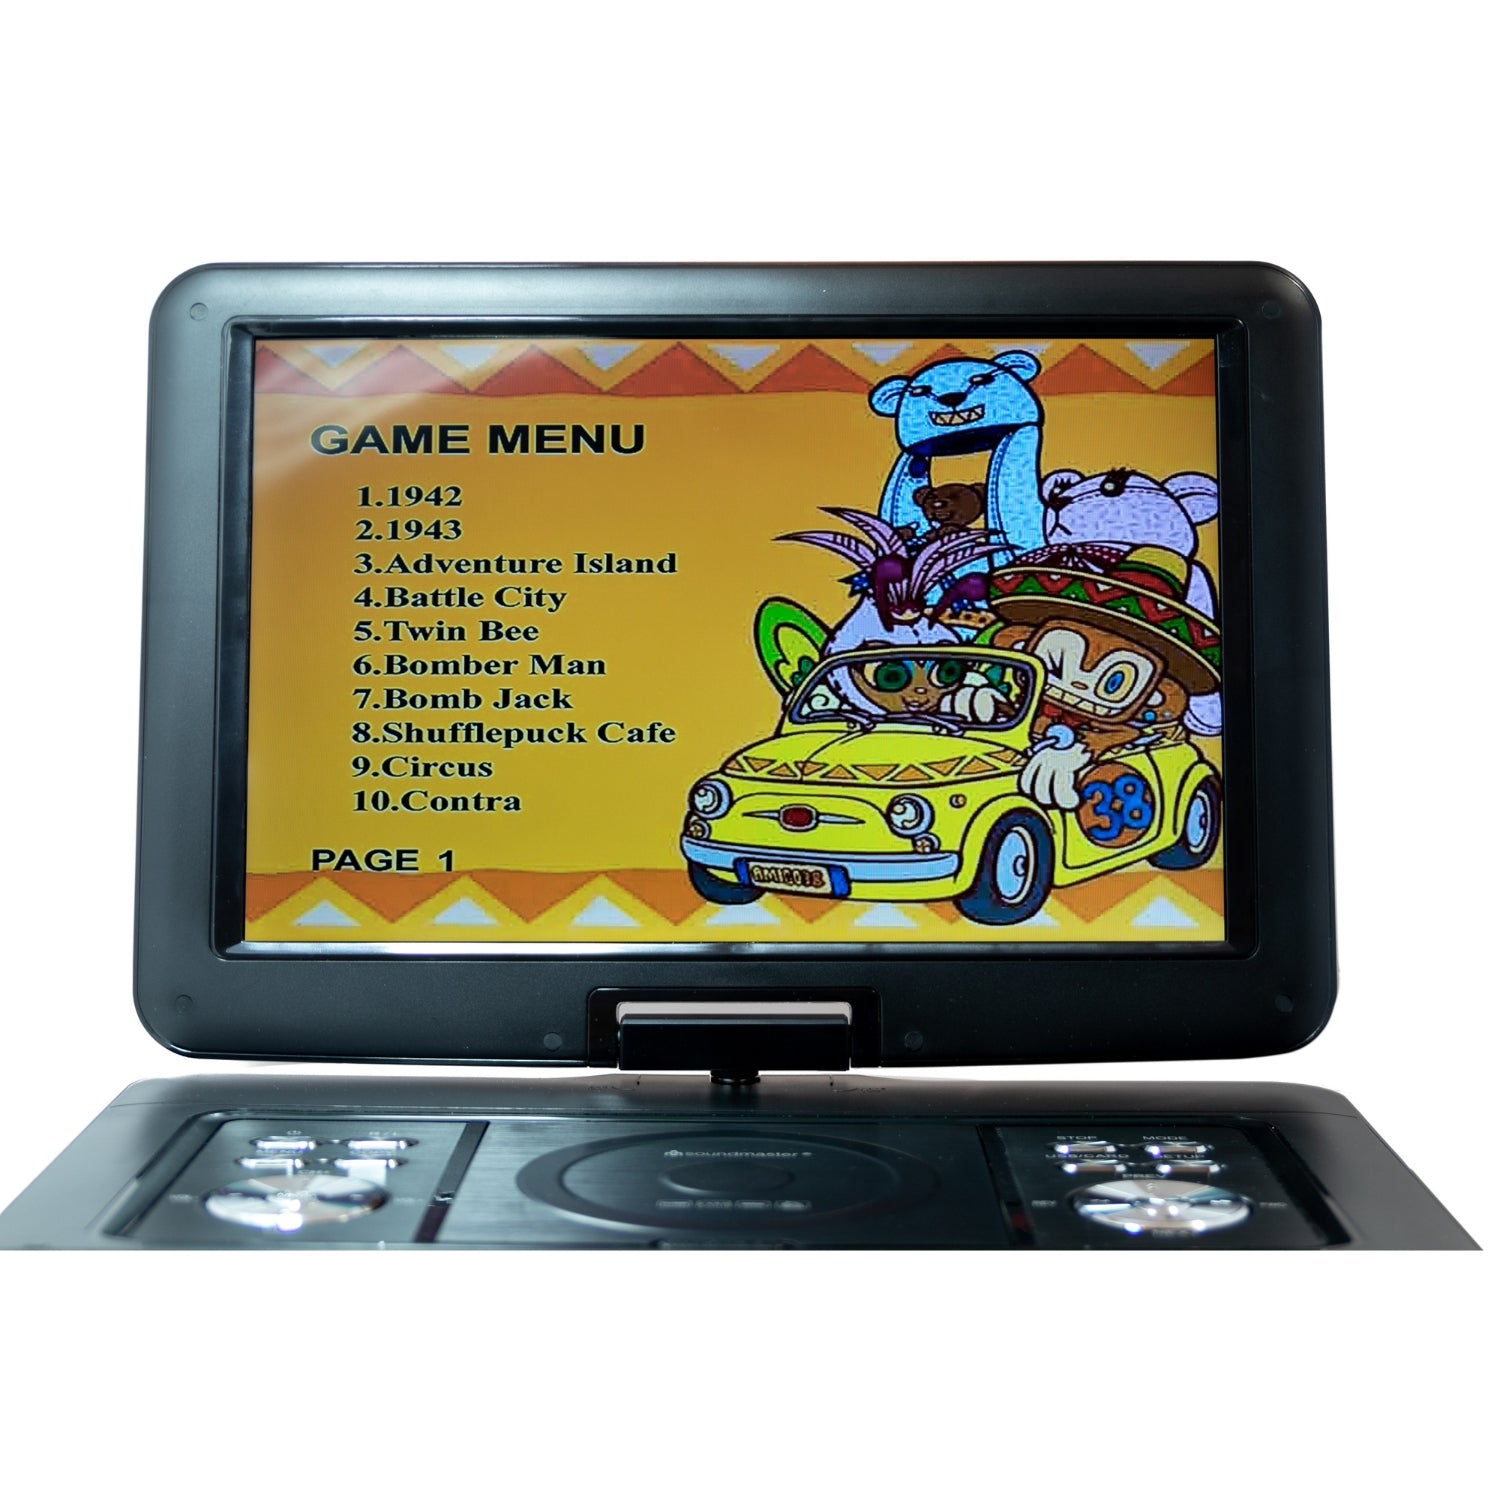 Soundmaster PDB1600SW portable DVD player with DVB-T2 HD tuner and 15.4" TFT screen incl. 300 games